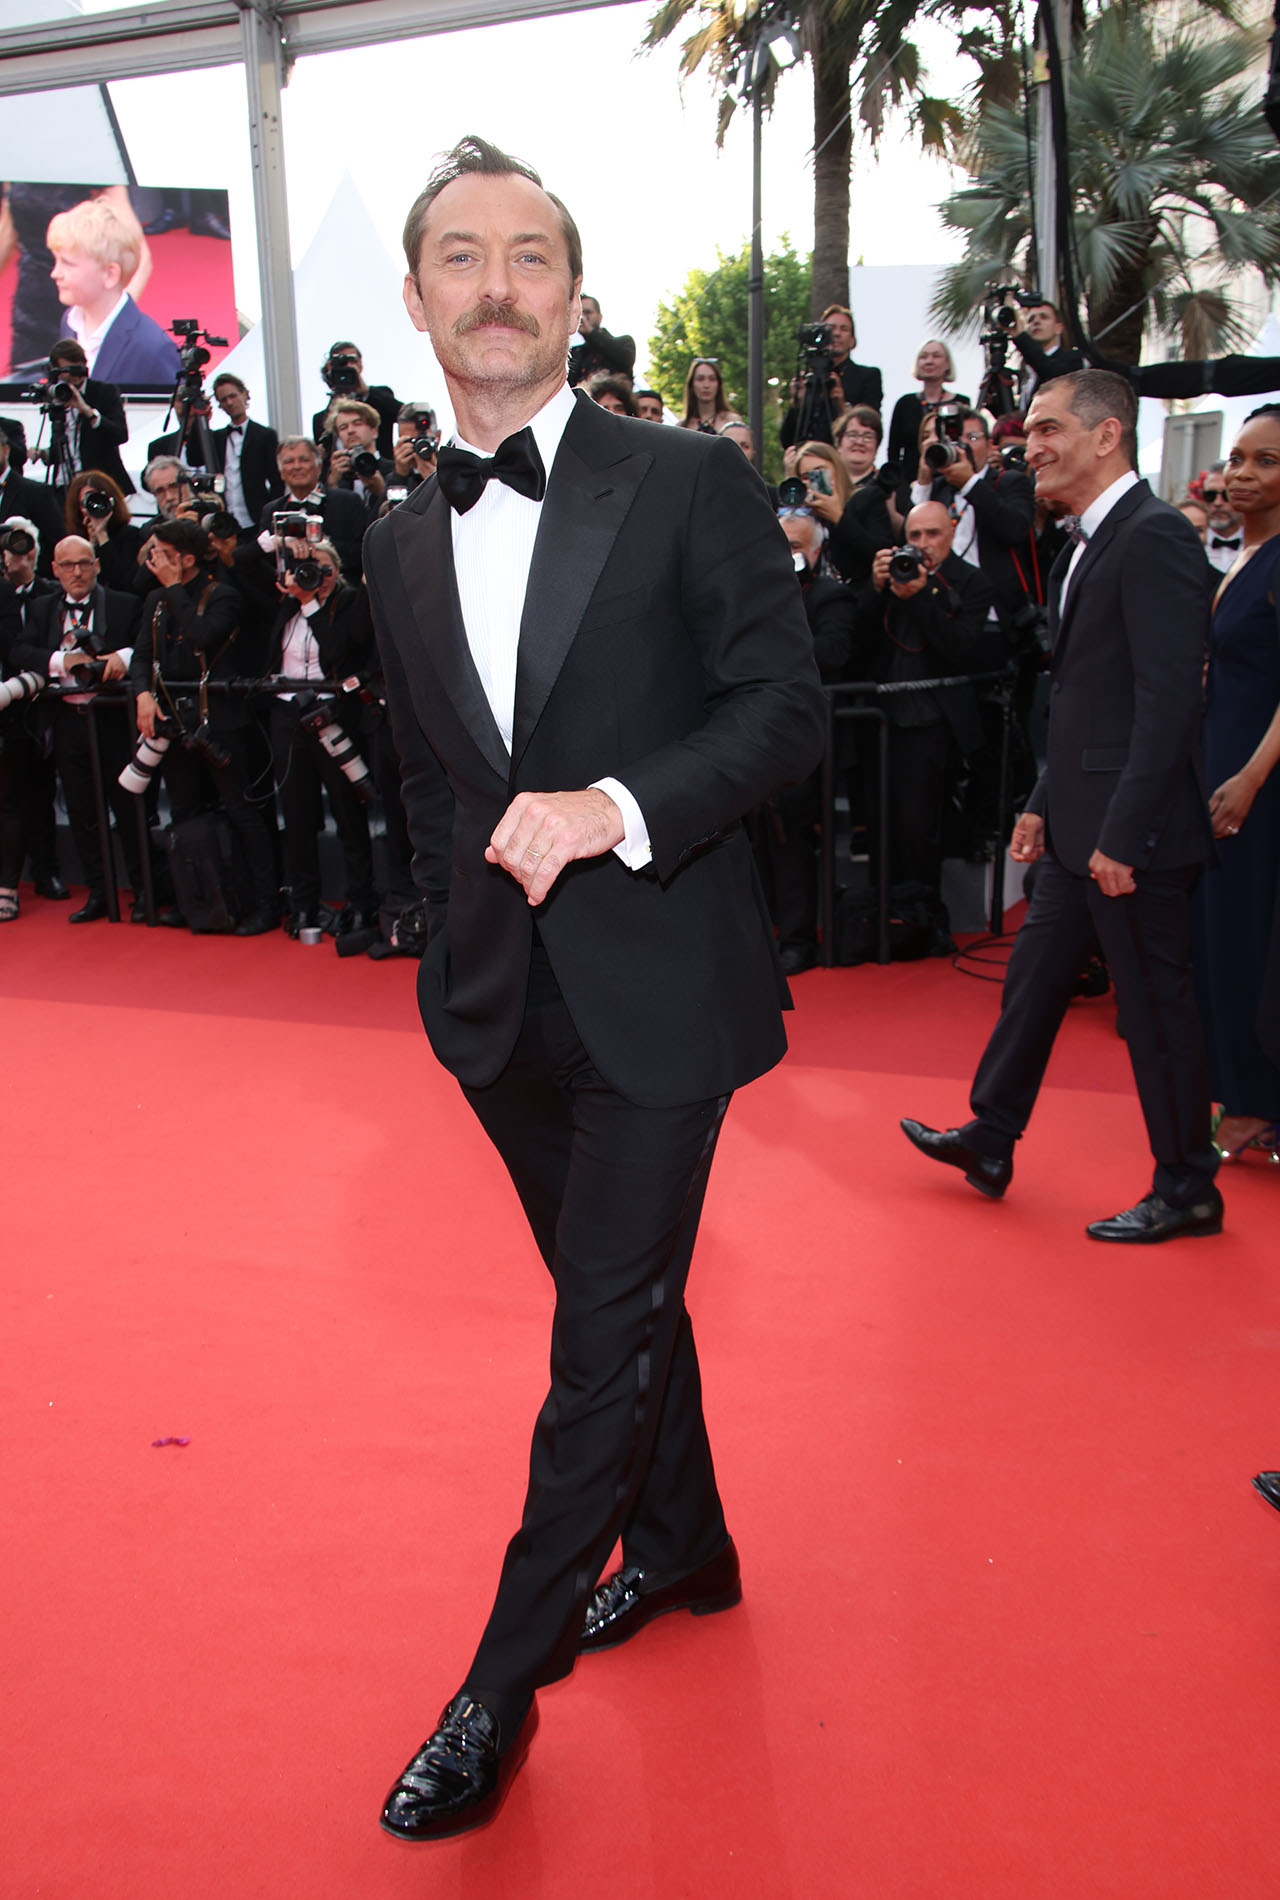 Cannes Film Festival, Jude Law